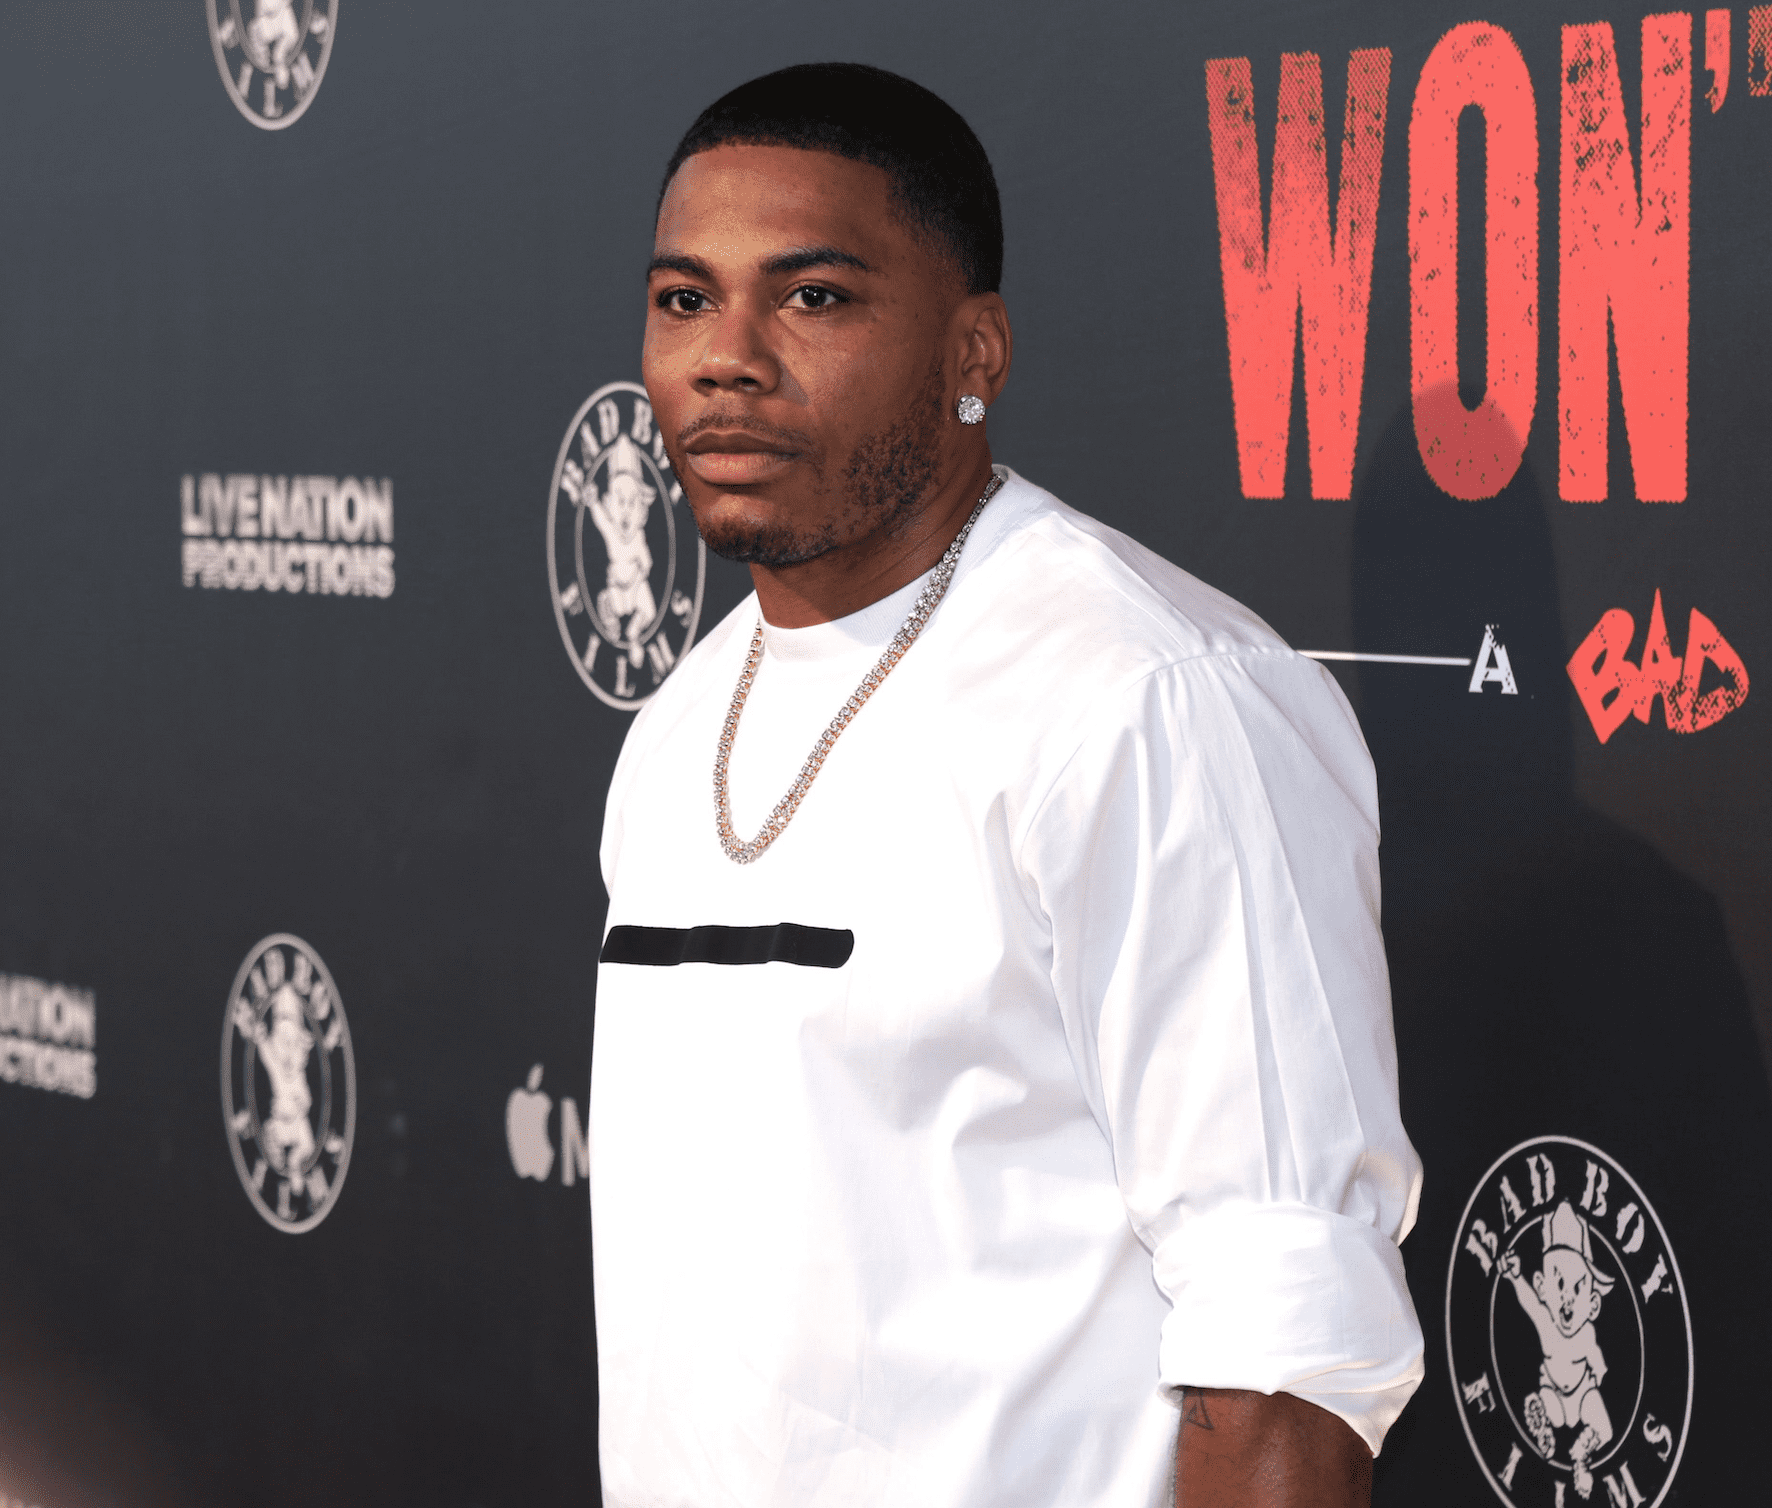 Rapper Nelly attends the premiere of "Can't Stop Won't Stop" on June 21, 2017. | Source: Getty Images